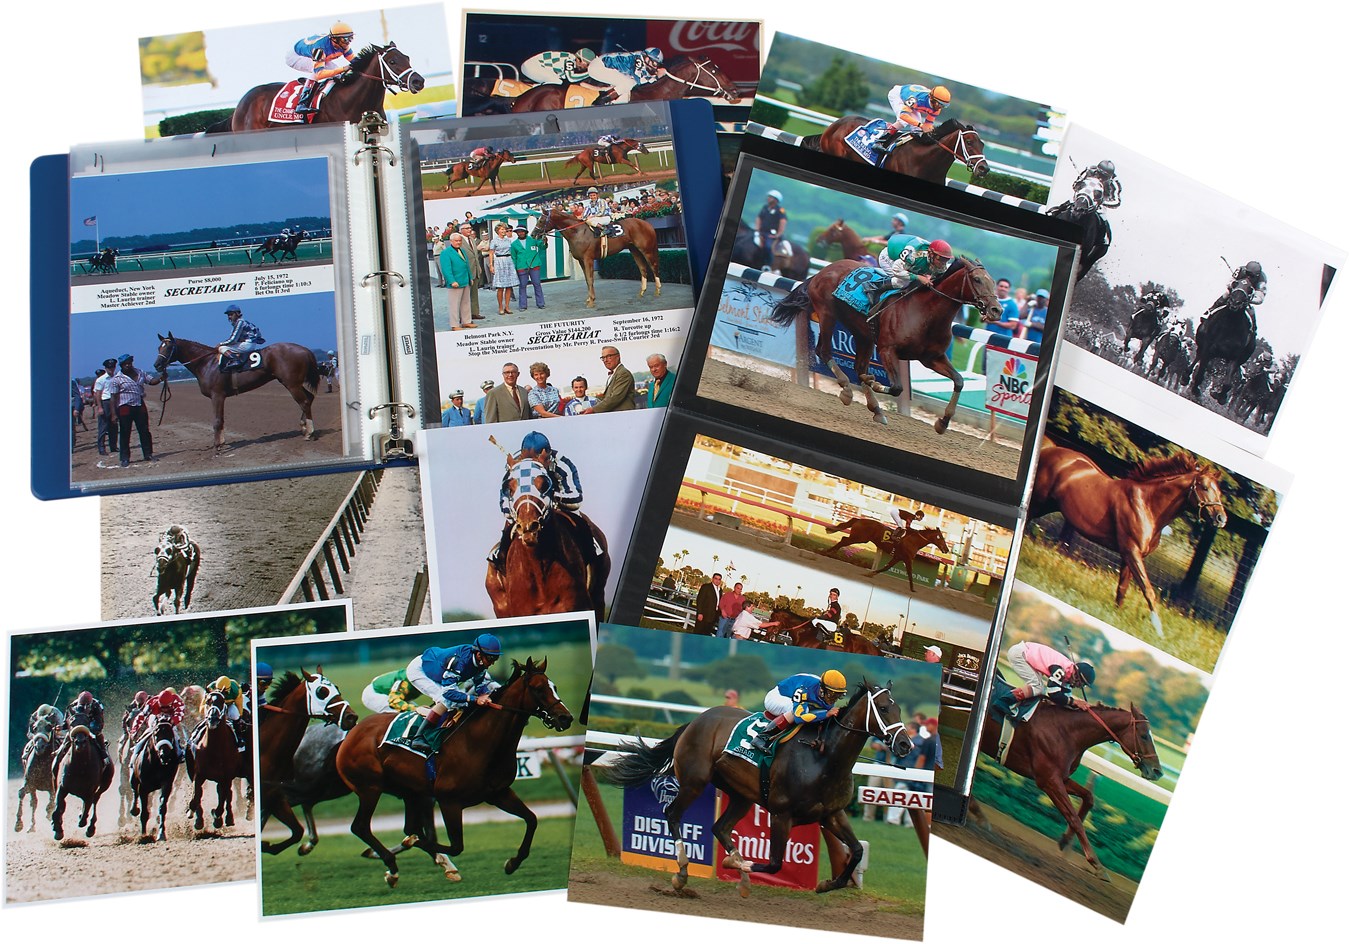 Horse Racing Photograph Collection with Iconic Images (225+)